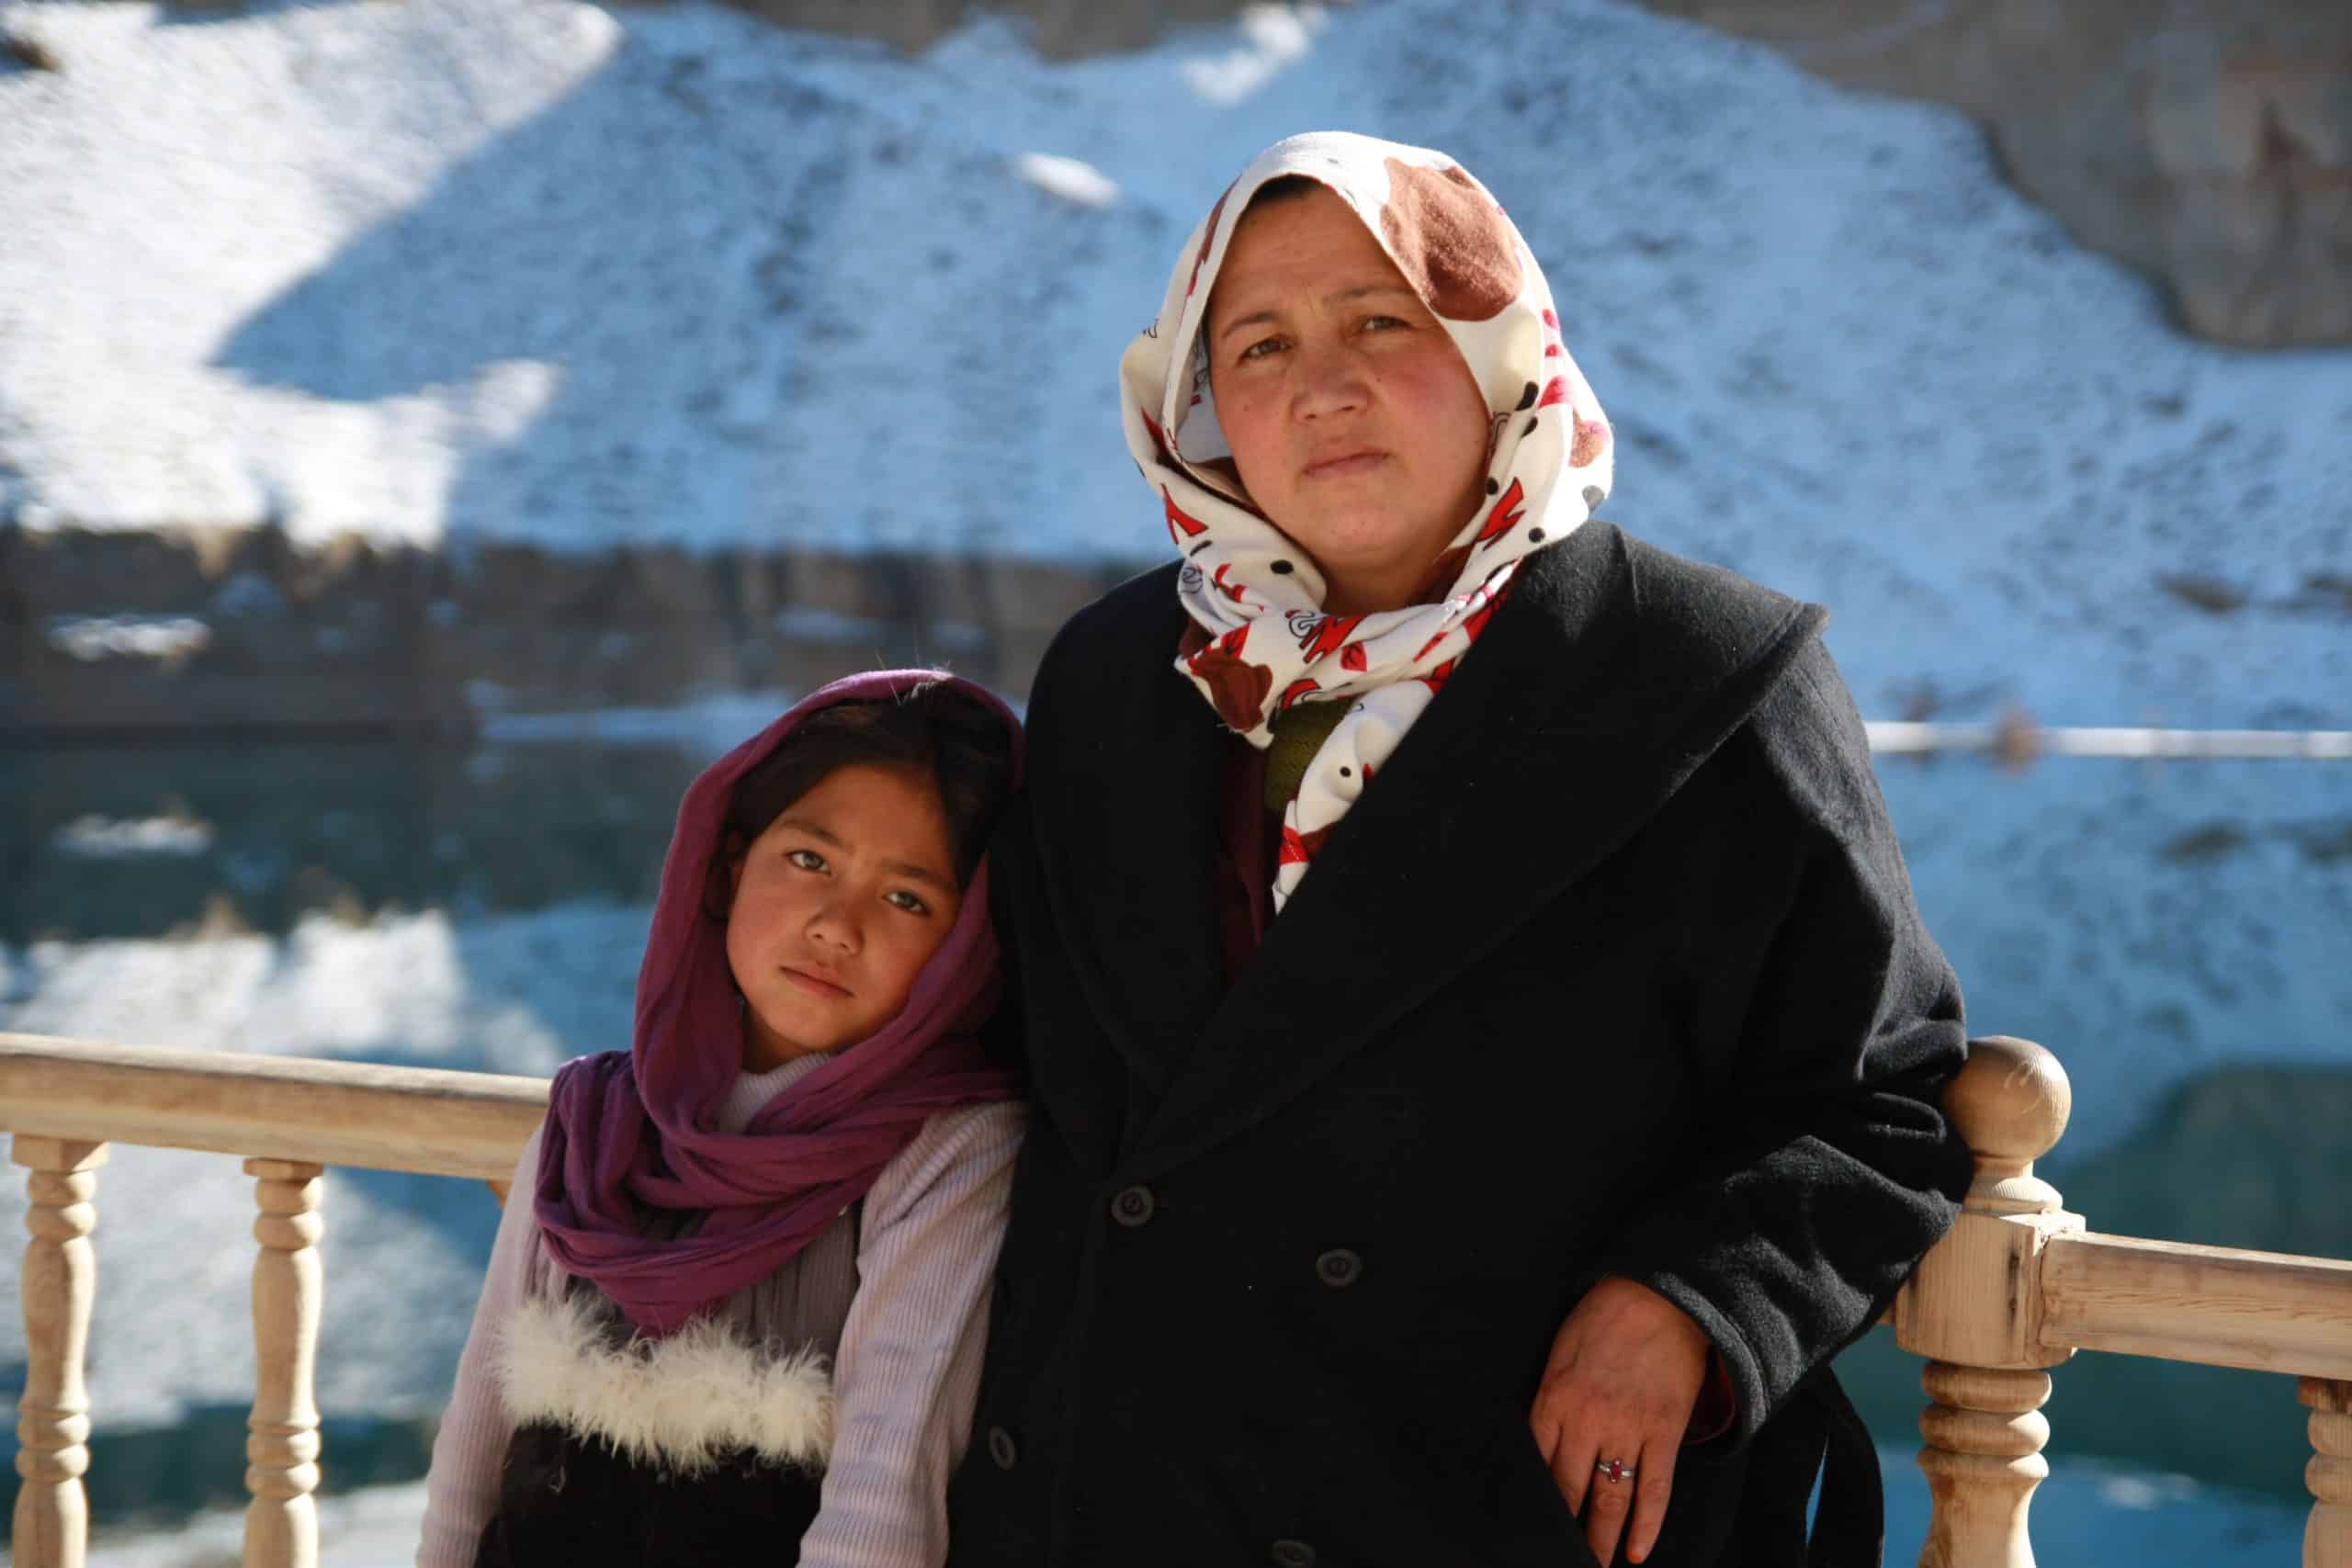 Uzra, who learned to read through Islamic Relief's education programme for women in Afghanistan, and her daughter Mahnaz